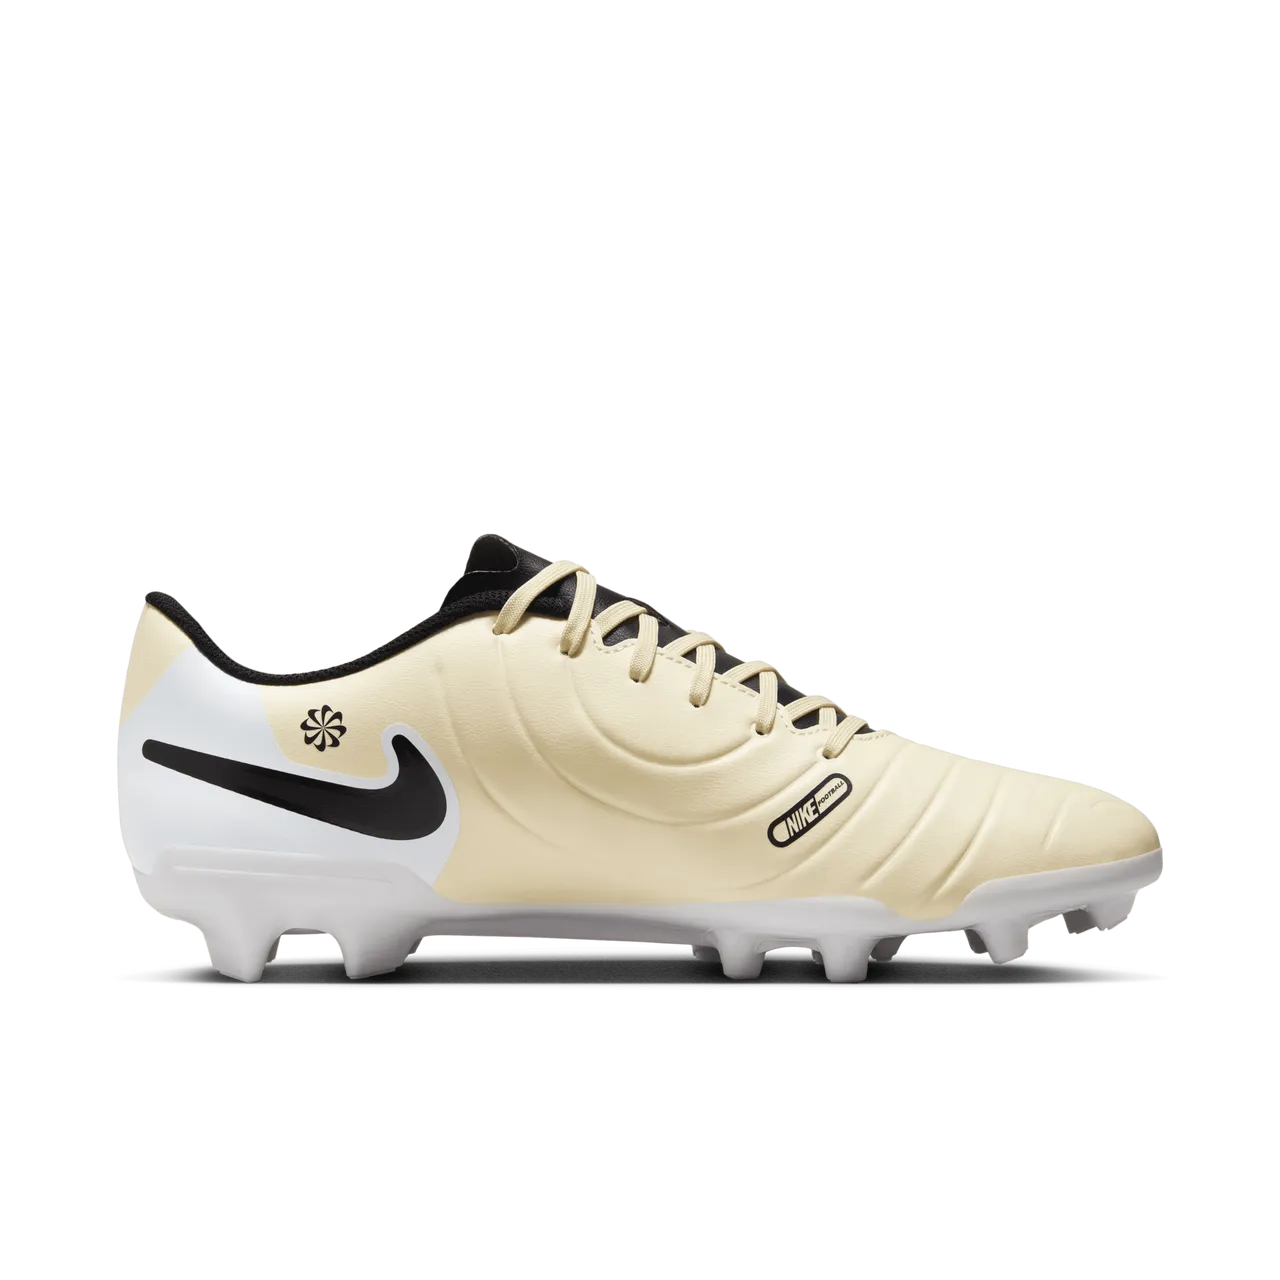 Nike Tiempo Legend 10 Club Multi-Ground Low-Top Football Boot - Yellow - Leather